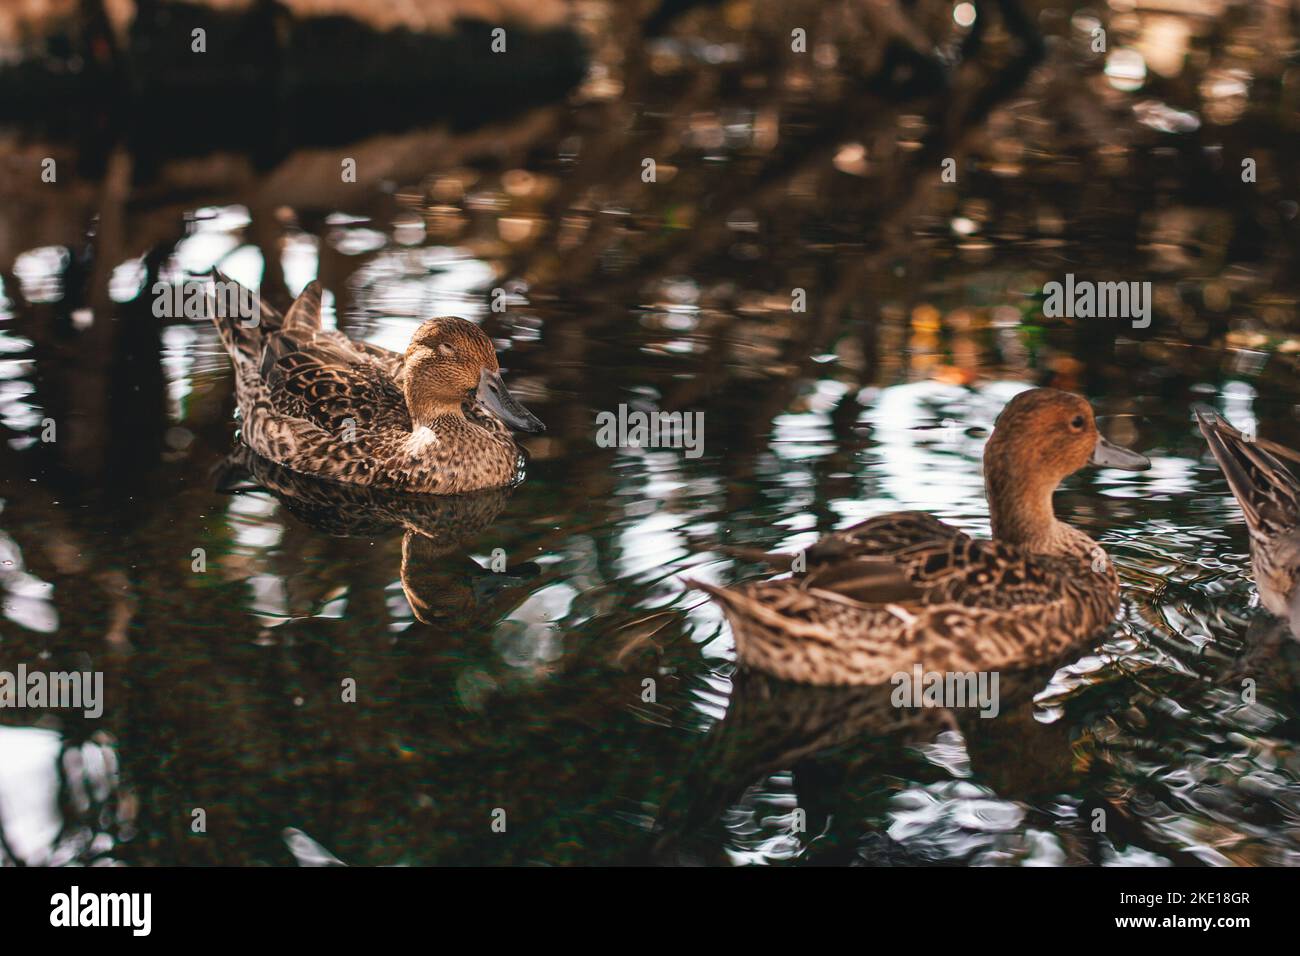 Brown ducks swim in the water where the leaves of the trees reflect. One duck has its eyes closed. Stock Photo